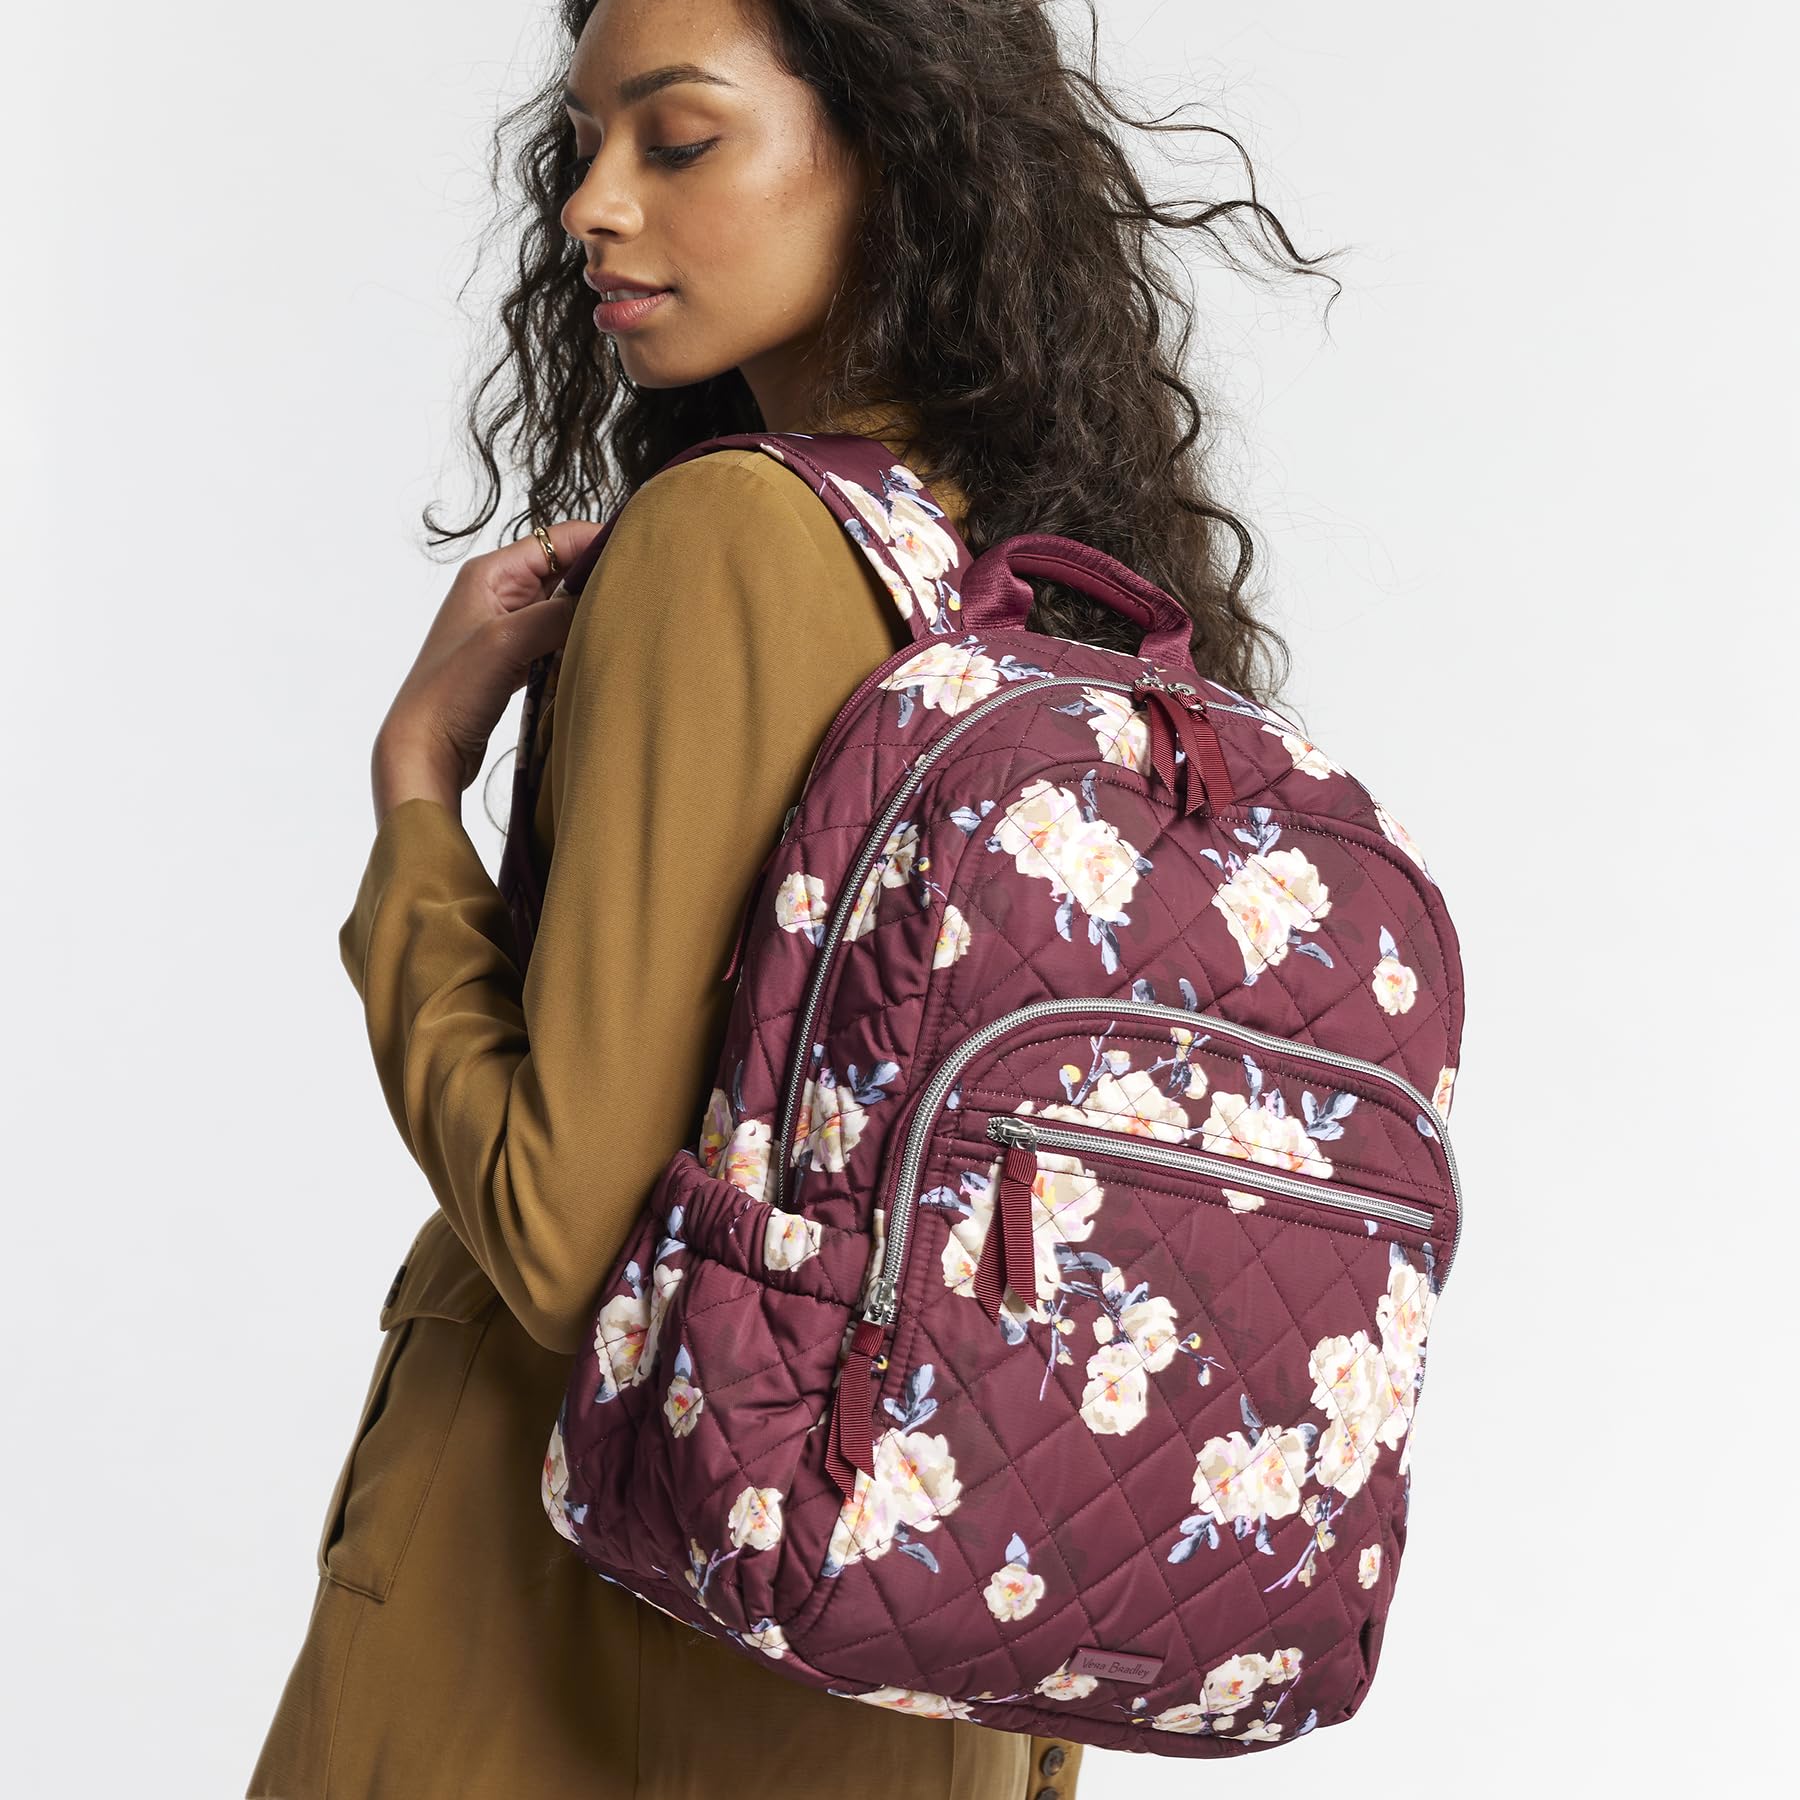 Vera Bradley Performance Twill Campus Backpack, Blooms and Branches